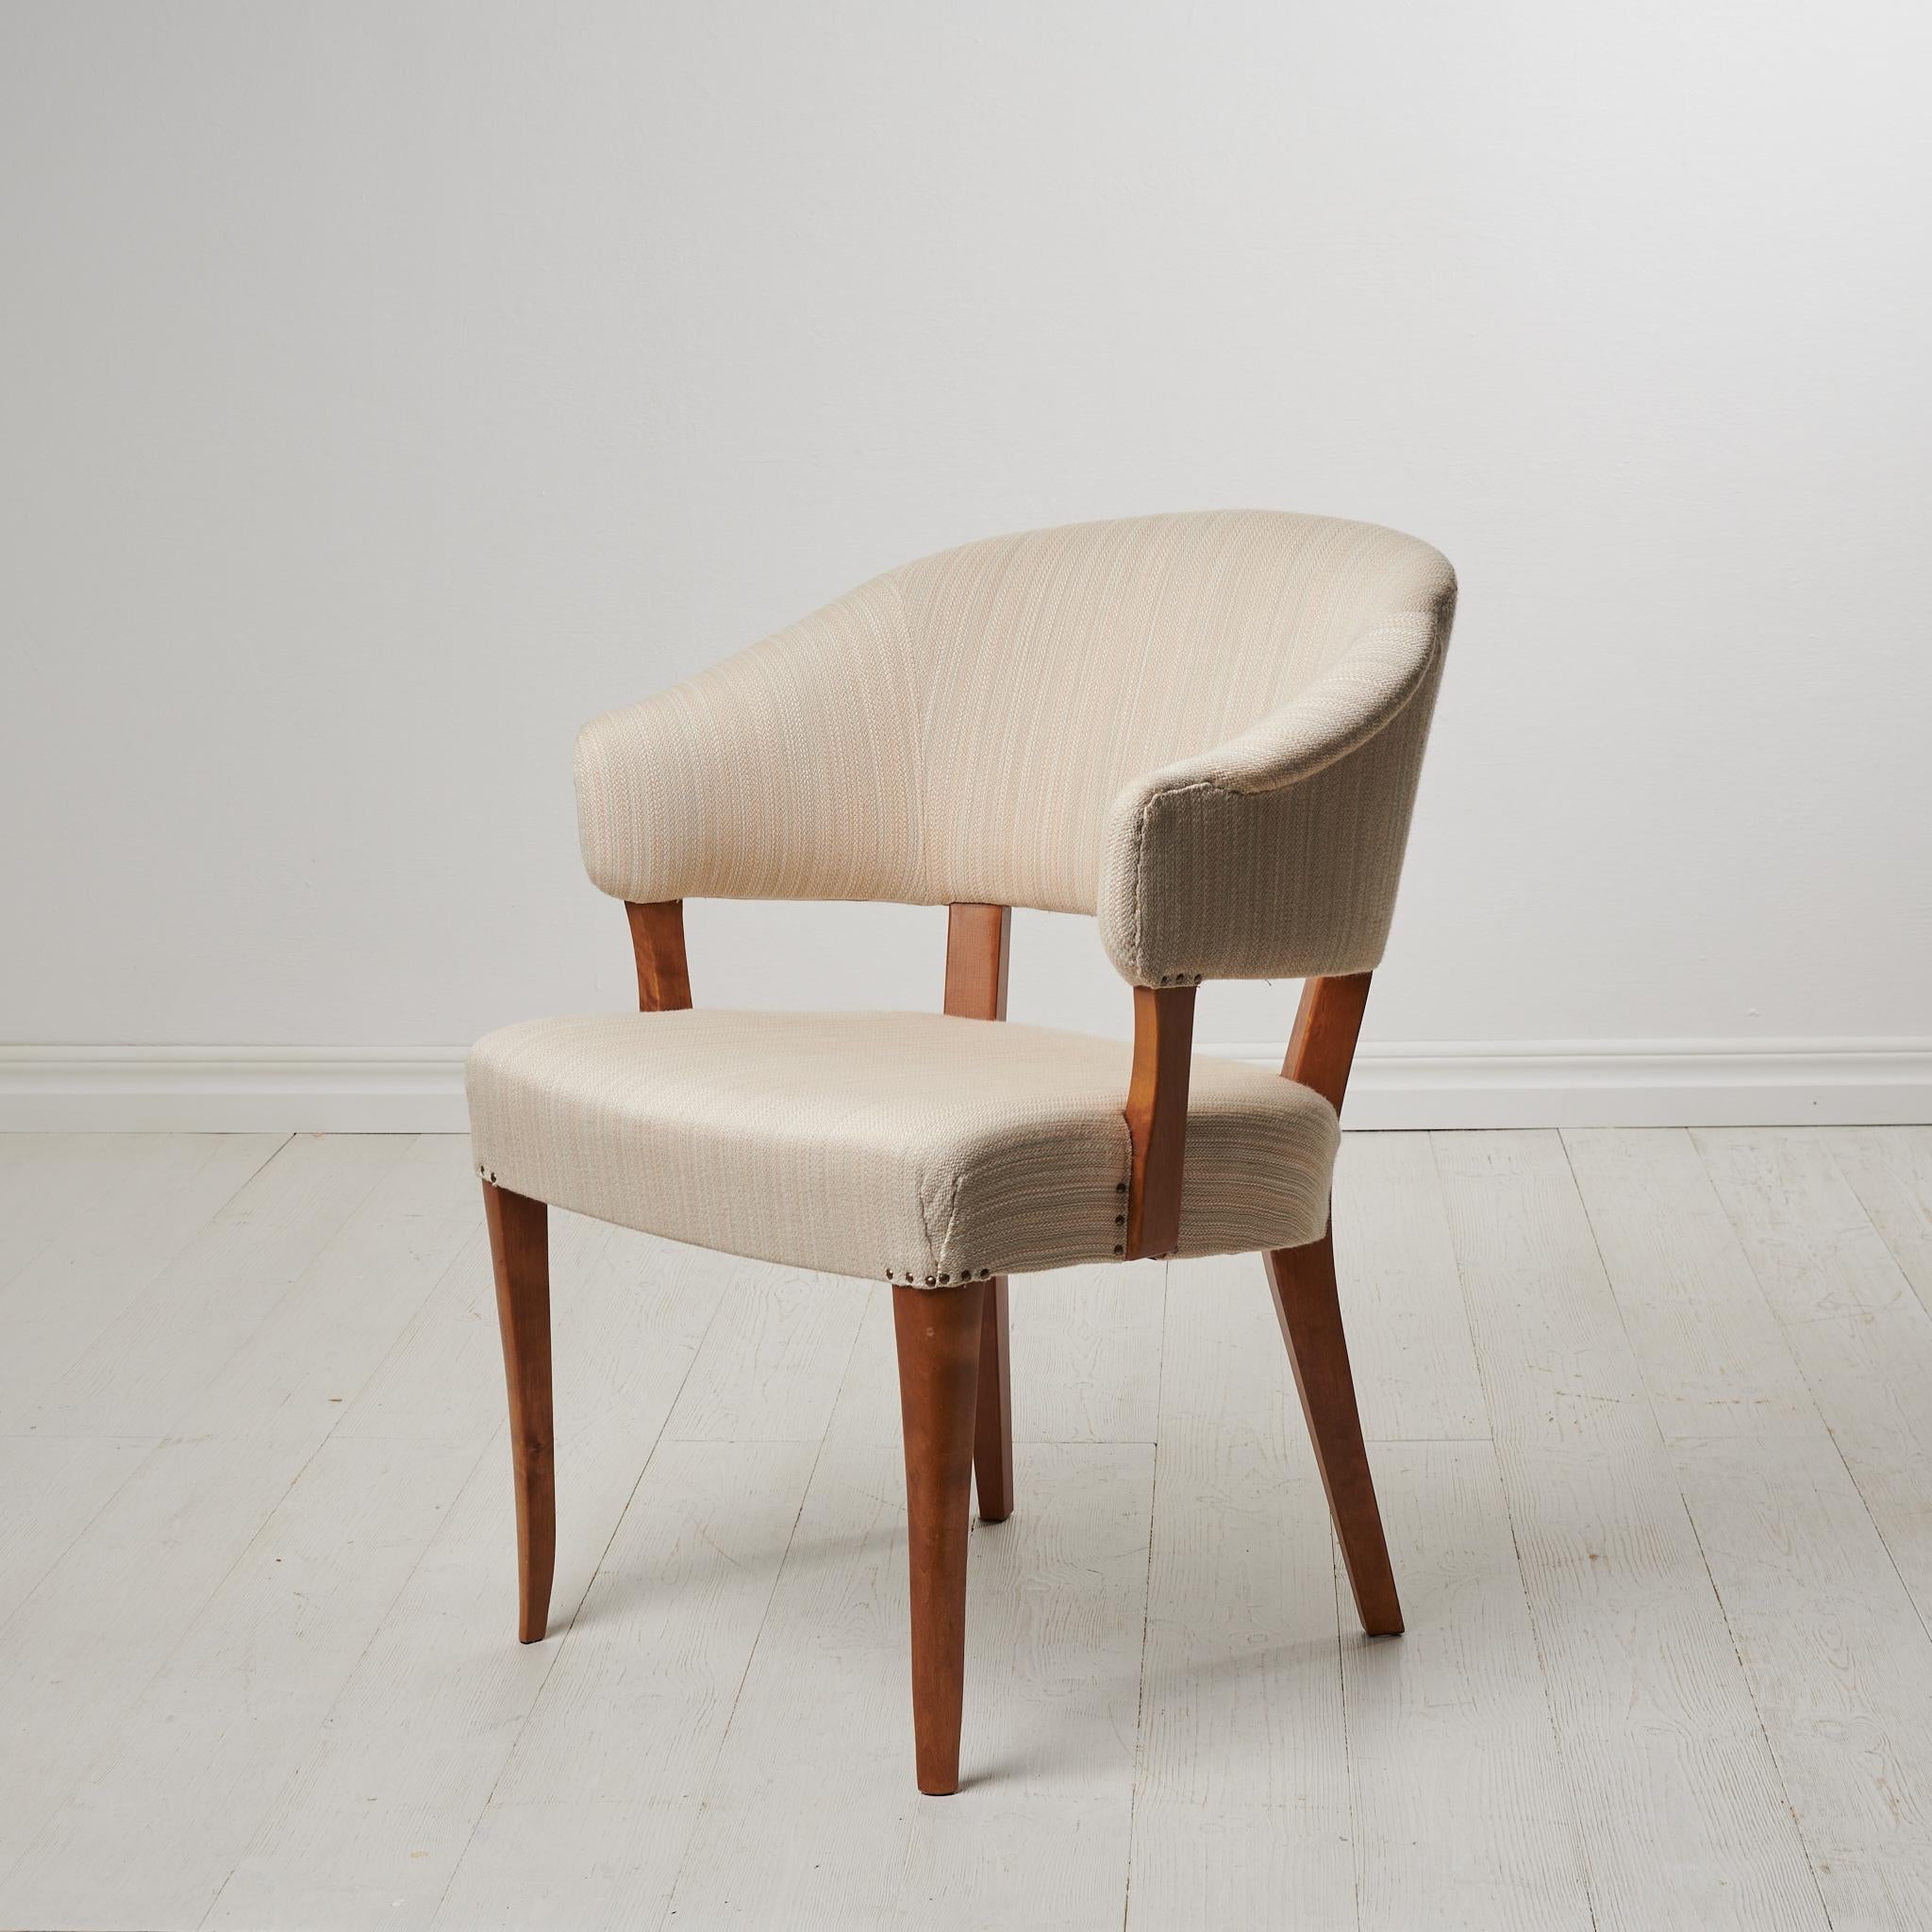 Scandinavian modern “Lata Greven” chair designed by Carl Malmsten during the Mid-20th Century, around 1953. Produced by O.H Sjögren. The name translates to the “lazy count” and is a classy but comfortable chair fit for nobility. The frame is solid